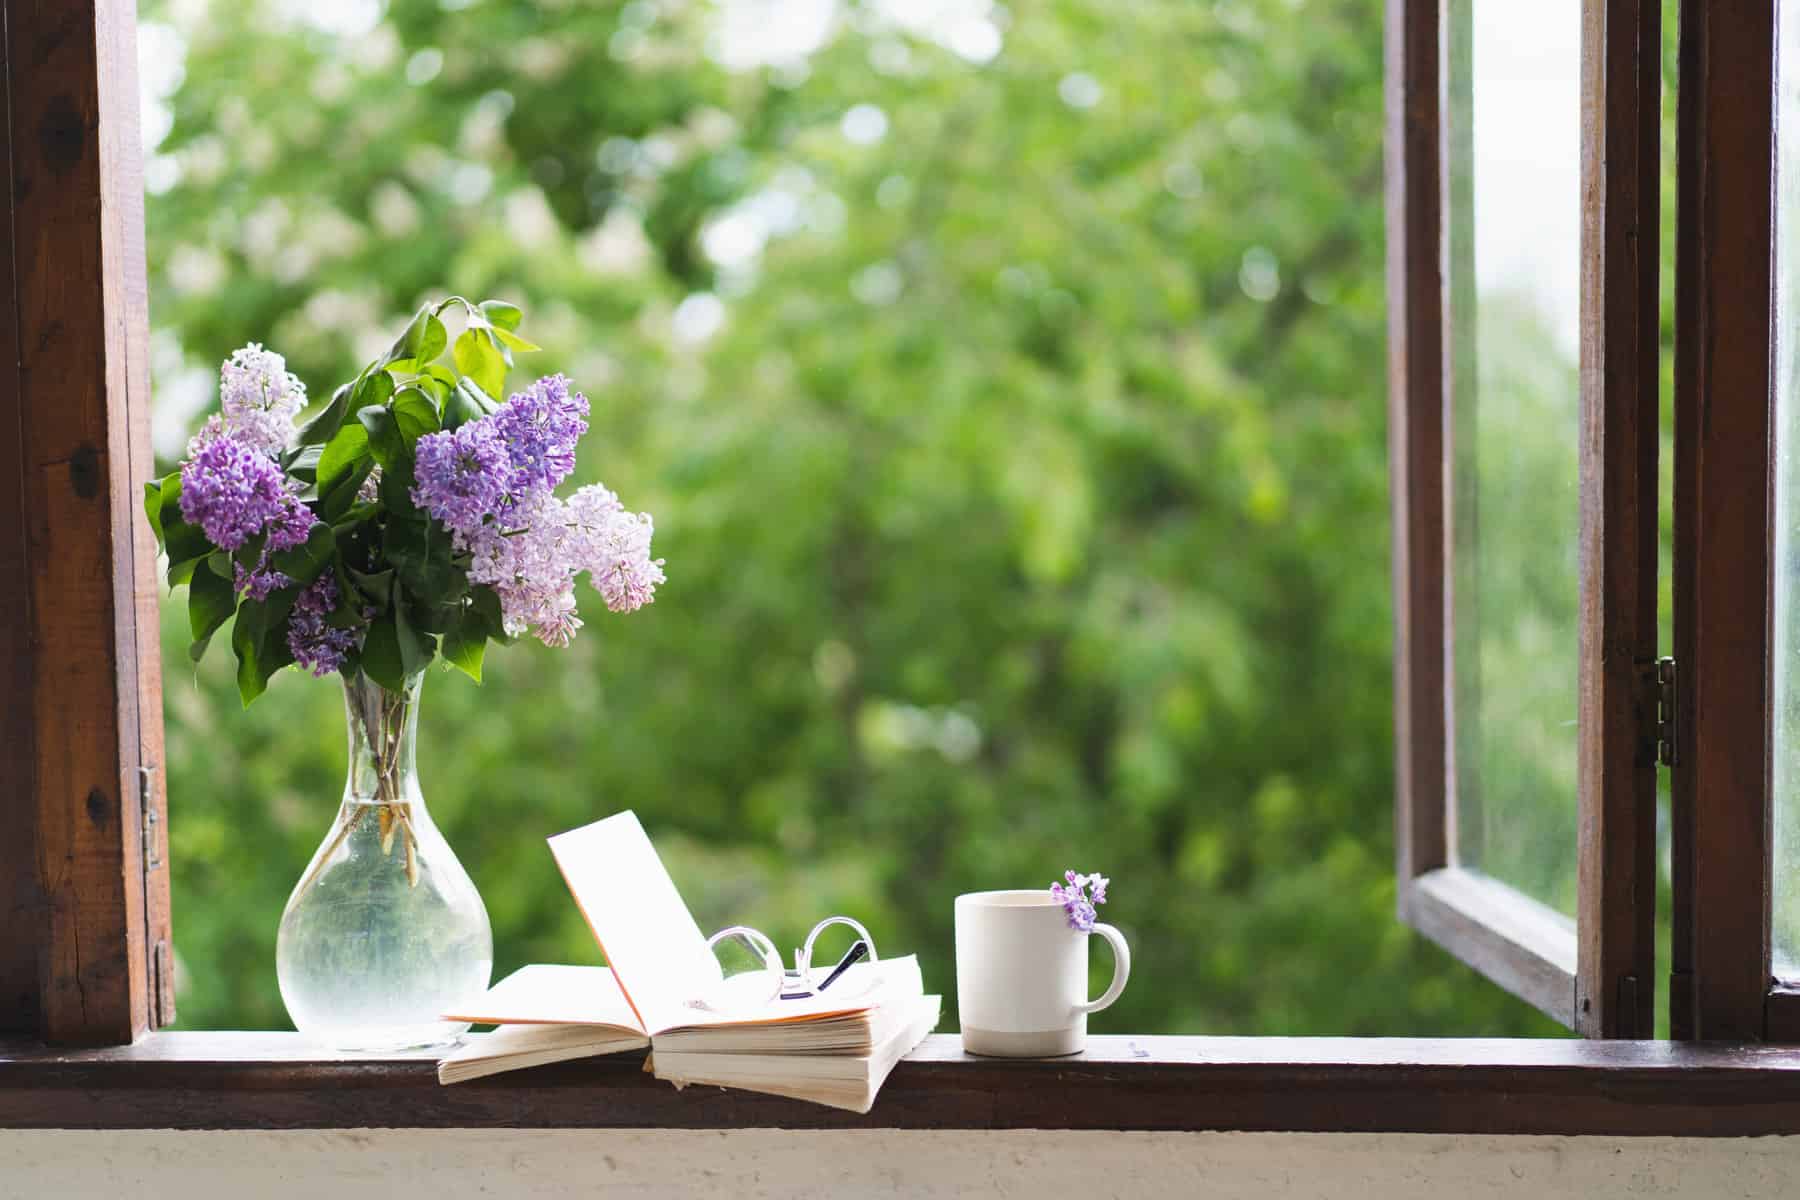 Book, glasses, cup of tea and lilac on a wooden window. Fragrant tea in the garden. Romantic concept. Vintage style